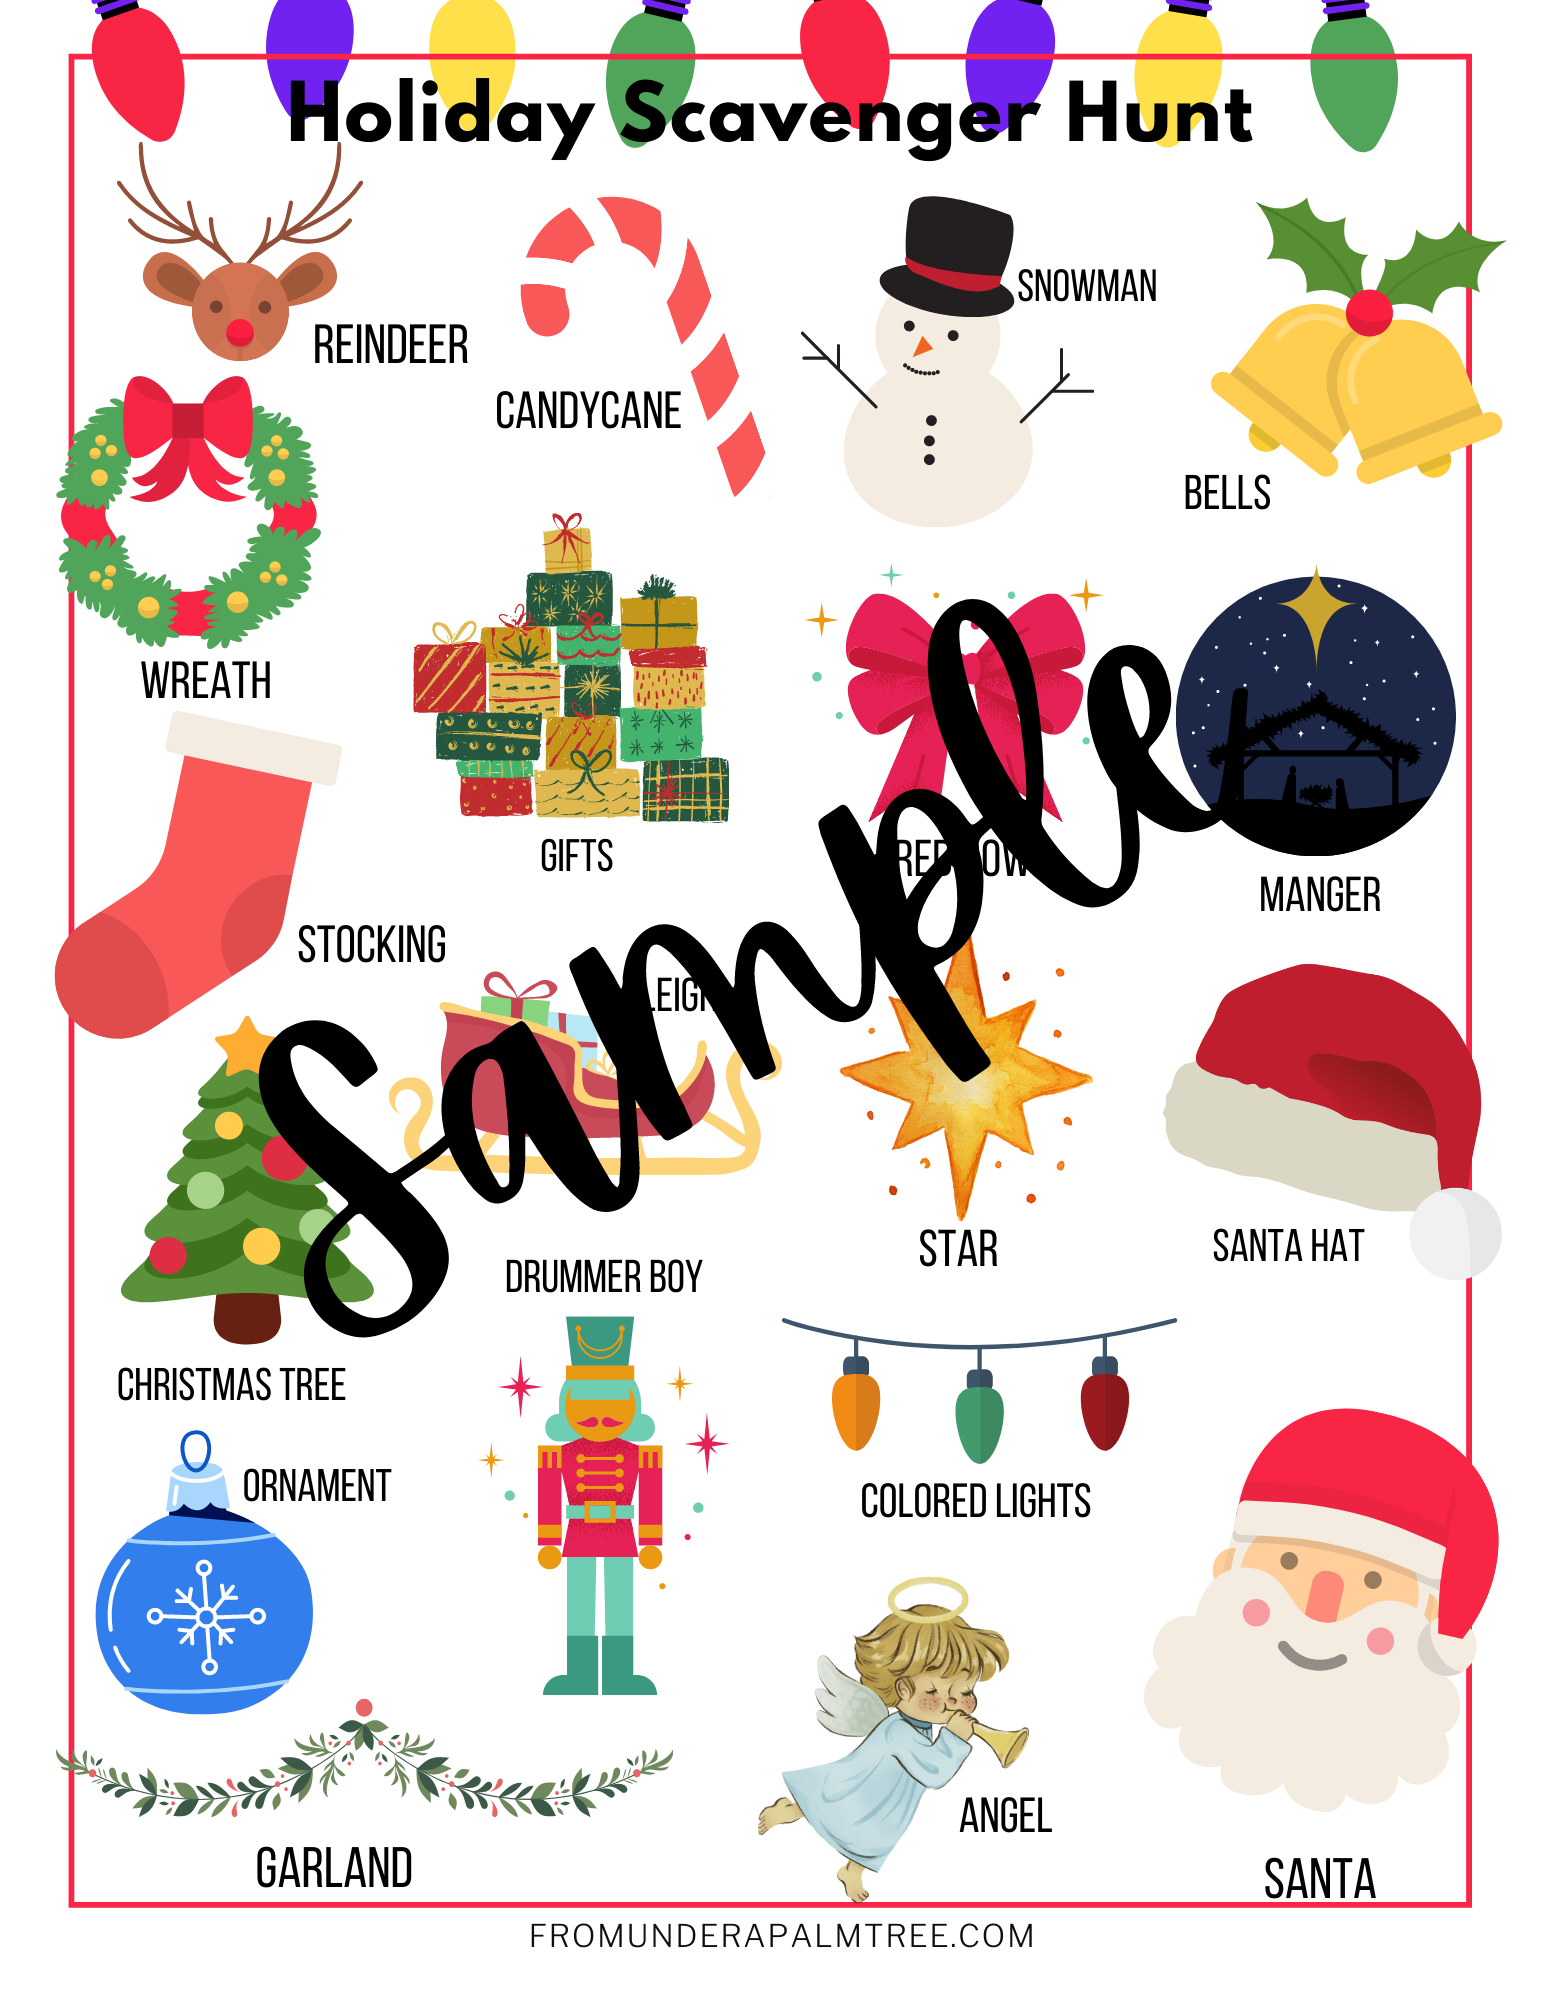 holiday fun| holiday scavenger hunt for kids | holiday games for kids | holiday scavenger hunt | christmas scavenger hunt | scavenger hunts for kids | free downloads for kids | free printables for kids | free holiday printables | free christmas printables | christmas printables | printable for kids | christmas activities for kids | holiday activities for kids |